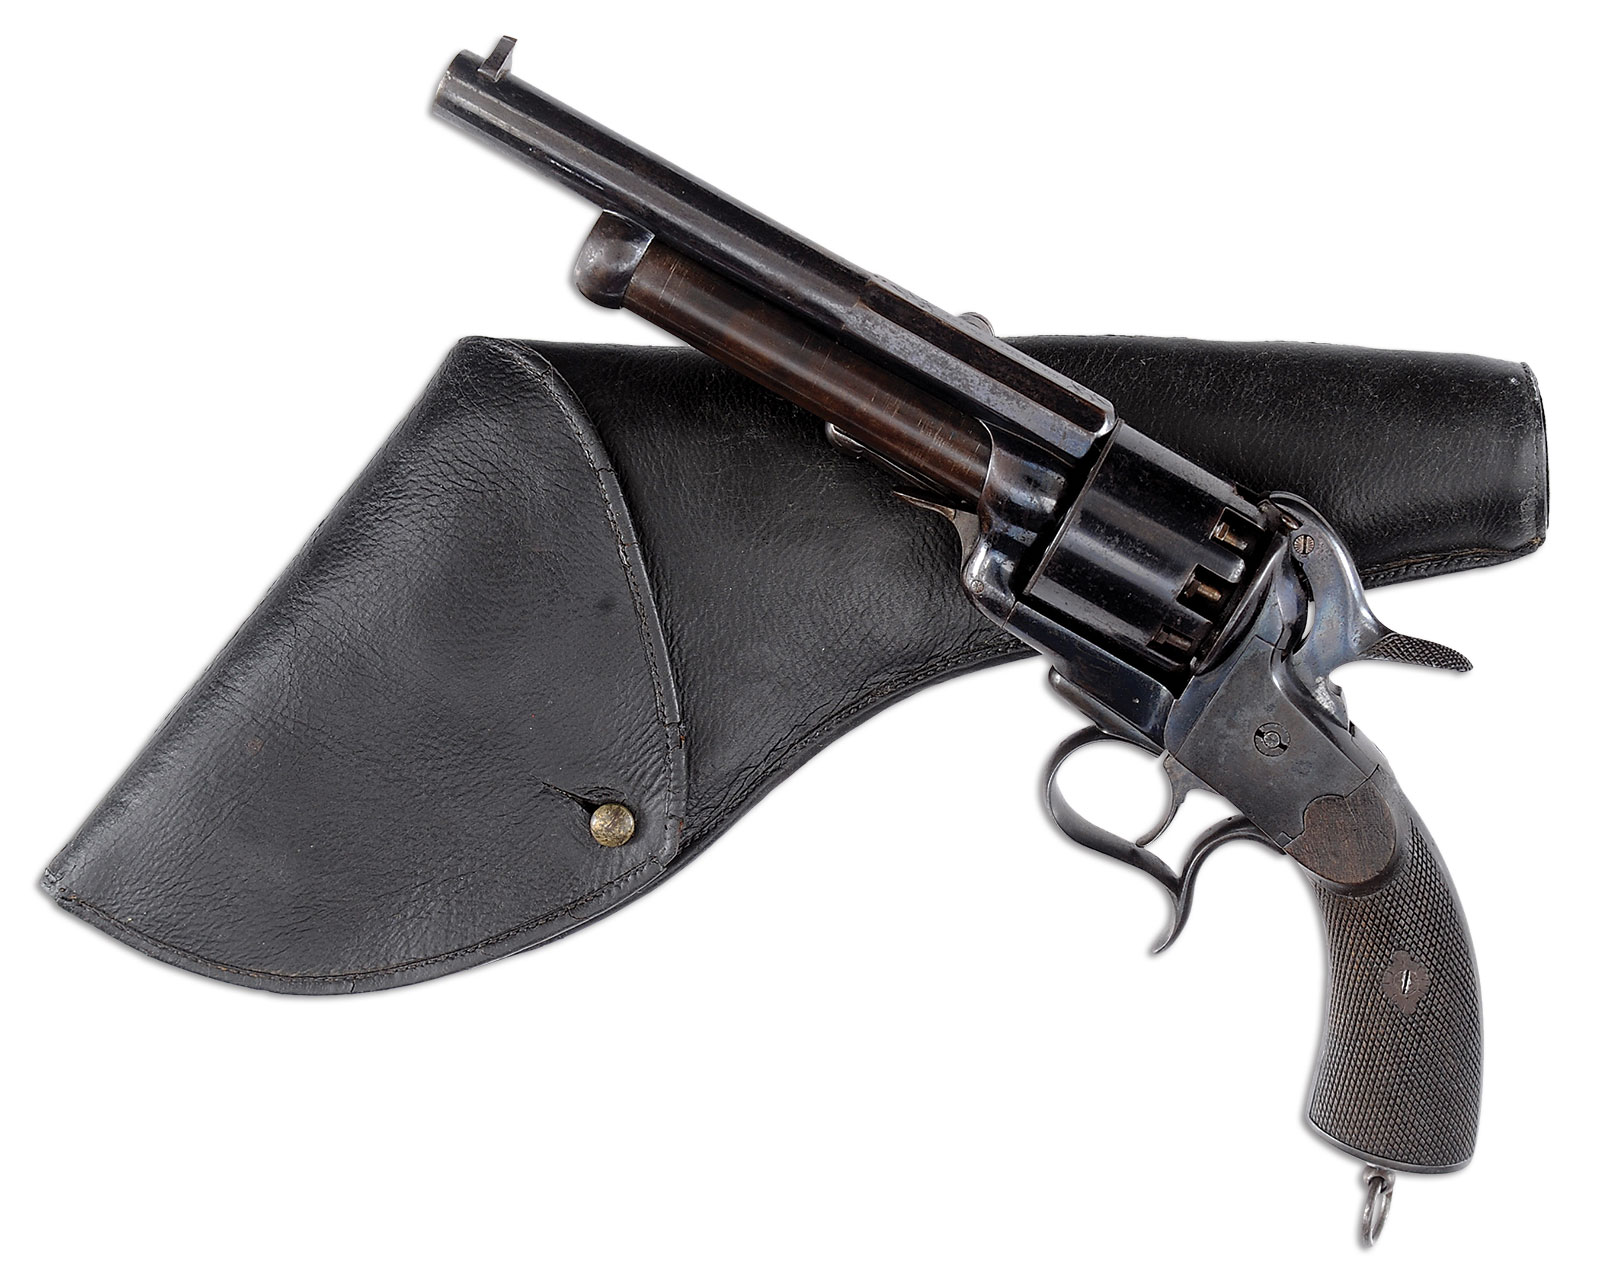 LeMat SN 8, General P.G.T. Beauregard’s Personal Revolver and Finest Known, Sold for $224,250